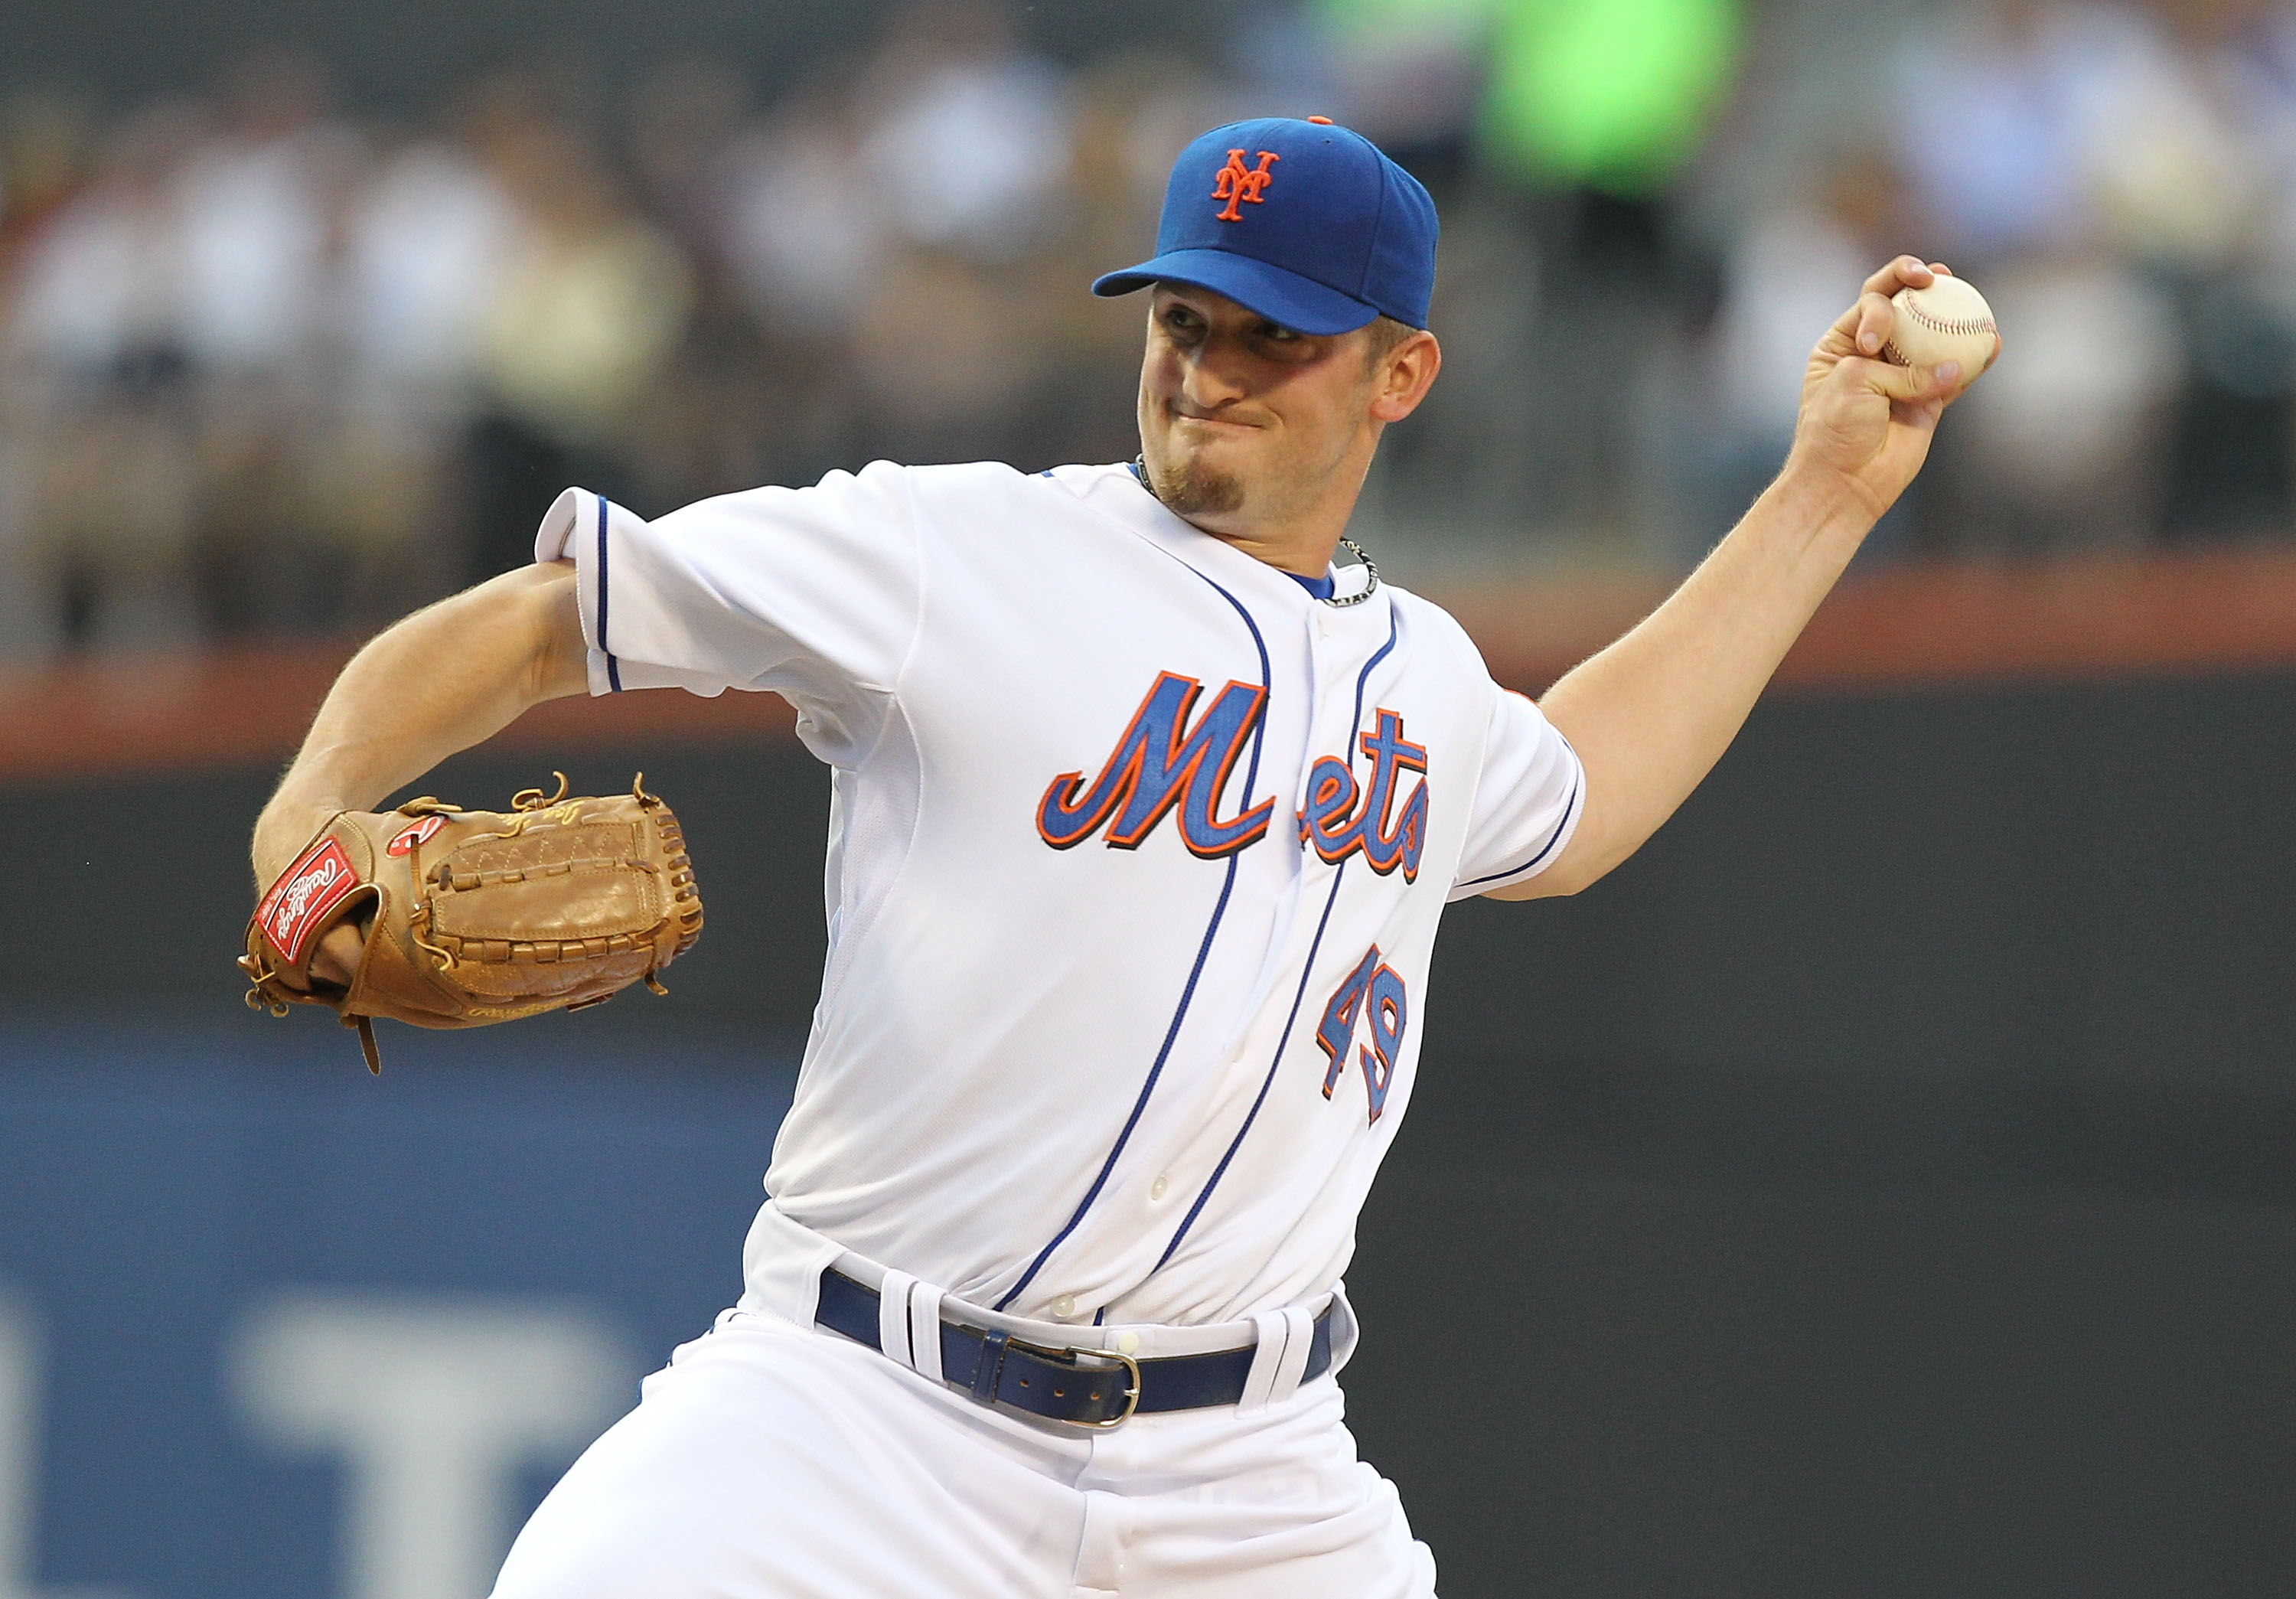 NEW YORK - JULY 27:  Jon Niese #49 of the New York Mets pitches against the St. Louis Cardinals during their game on July 27, 2010 at Citi Field in the Flushing neighborhood of the Queens borough of New York City.  (Photo by Al Bello/Getty Images)